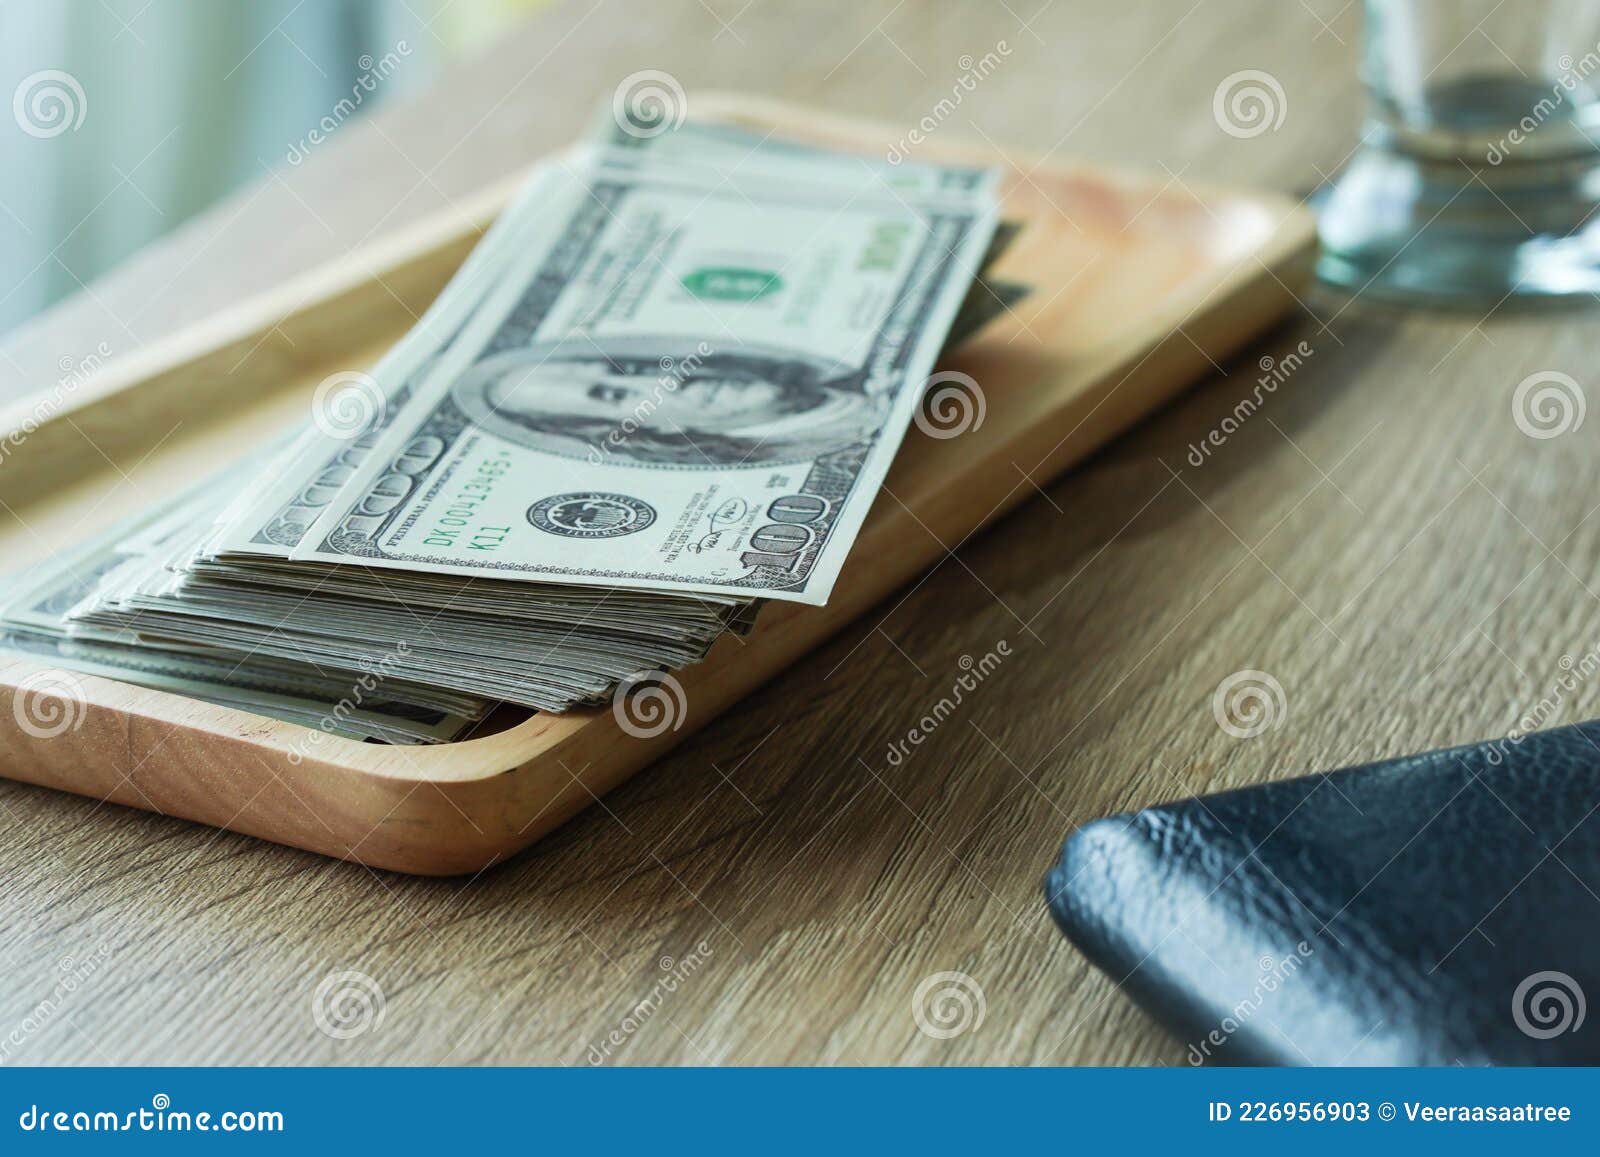 Concept, Change, Invest, Pay, but Get Back, in Dollar Bills, Huge, Make  Money at Home, or Anywhere, with Free Time Stock Image - Image of currency,  people: 226956903